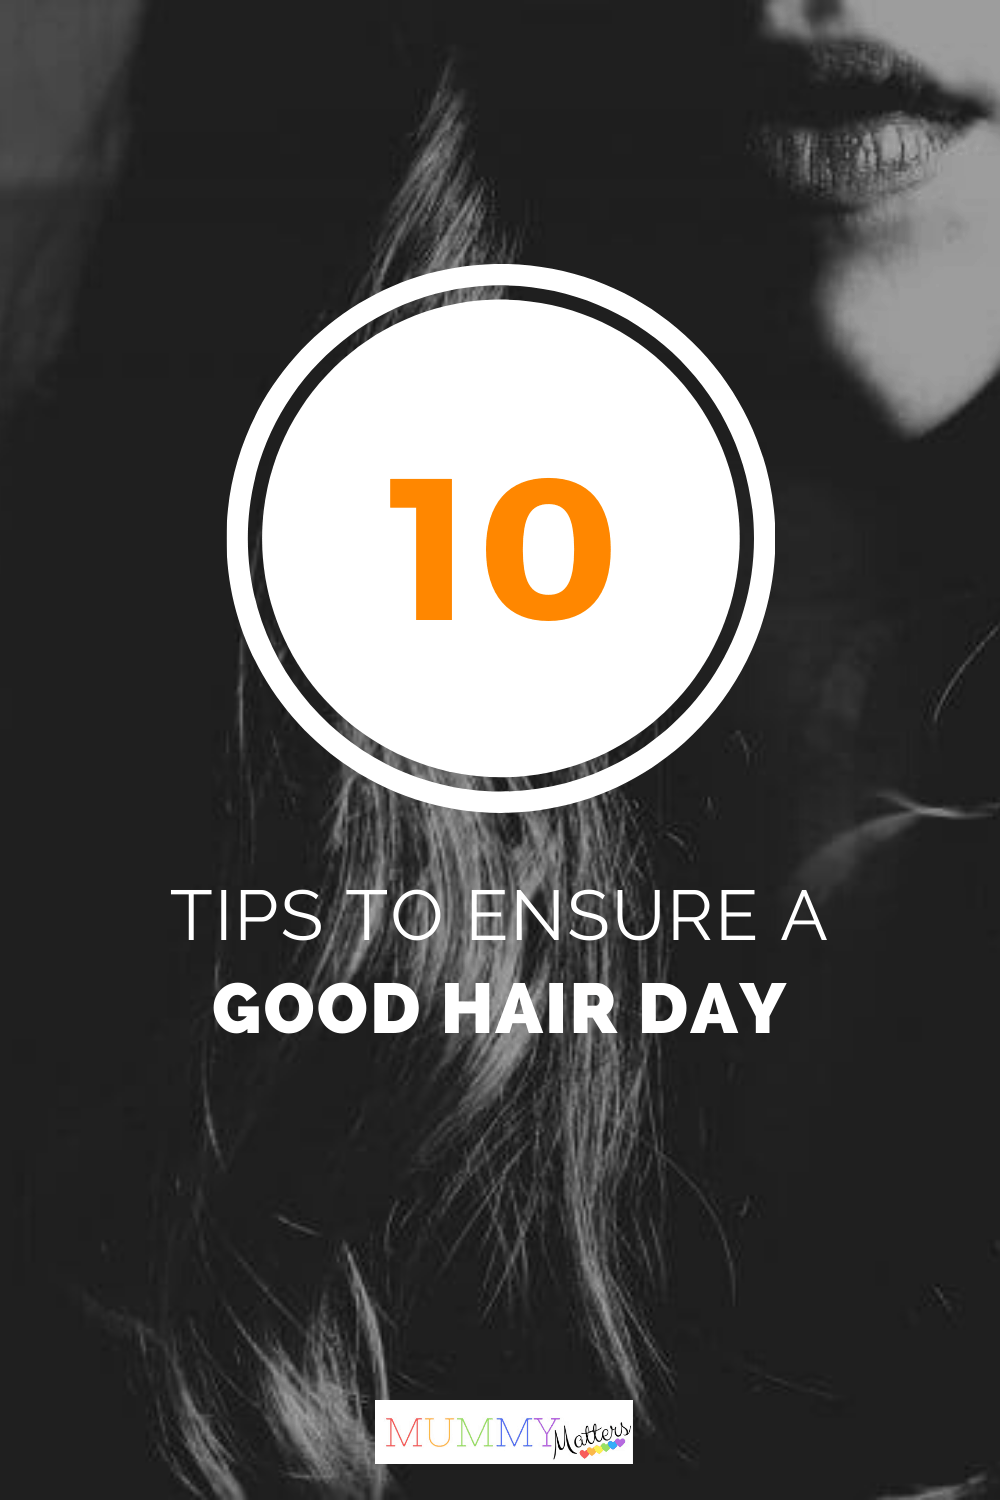 I have been reading up online for the best tips on how to have a good hair day and I wanted to share them with you so we can all have great hair.